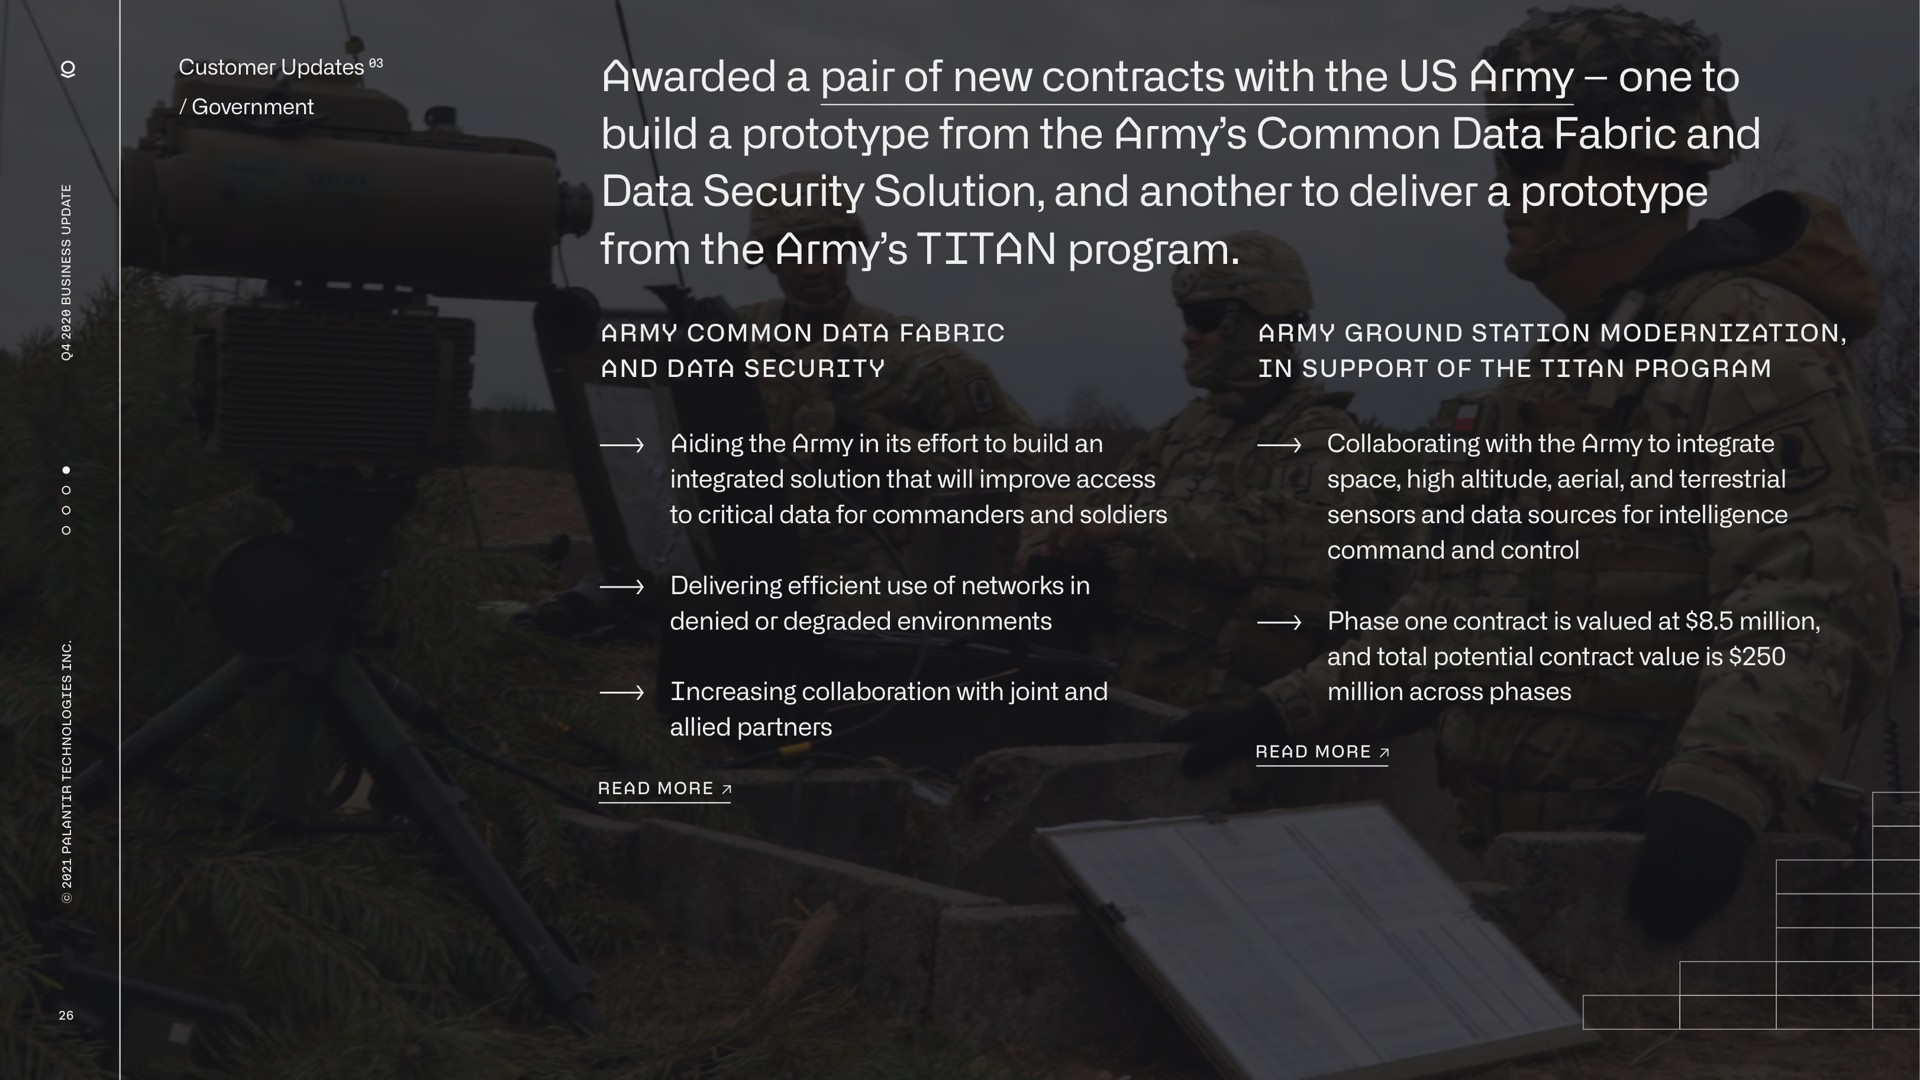 awarded a pair of new contracts with the us army one to build a prototype from the army common data fabric and data security solution and another to deliver a prototype from the army program | Palantir